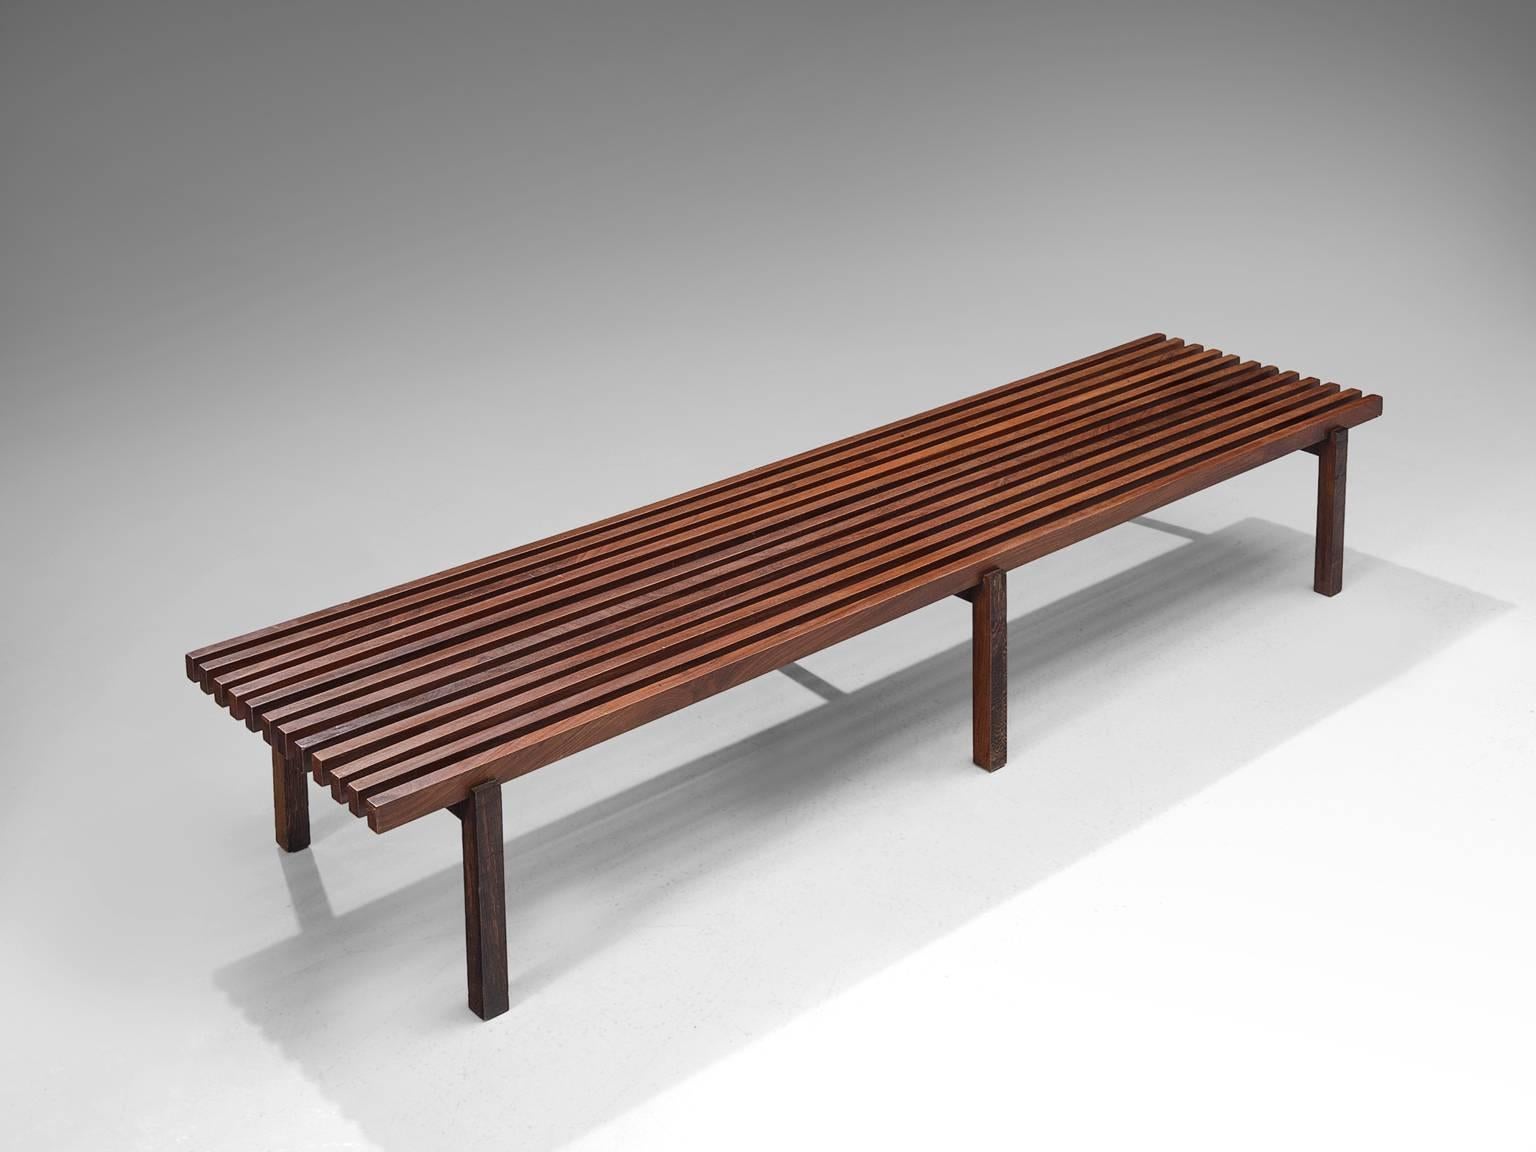 Slat bench, in stained ash and wenge wood, Europe, 1960s. 

Slat bench in stained ash for the seating and wenge wood for the legs. This bench has a modest design. The slats on top are colored dark which create a nice balance between the different